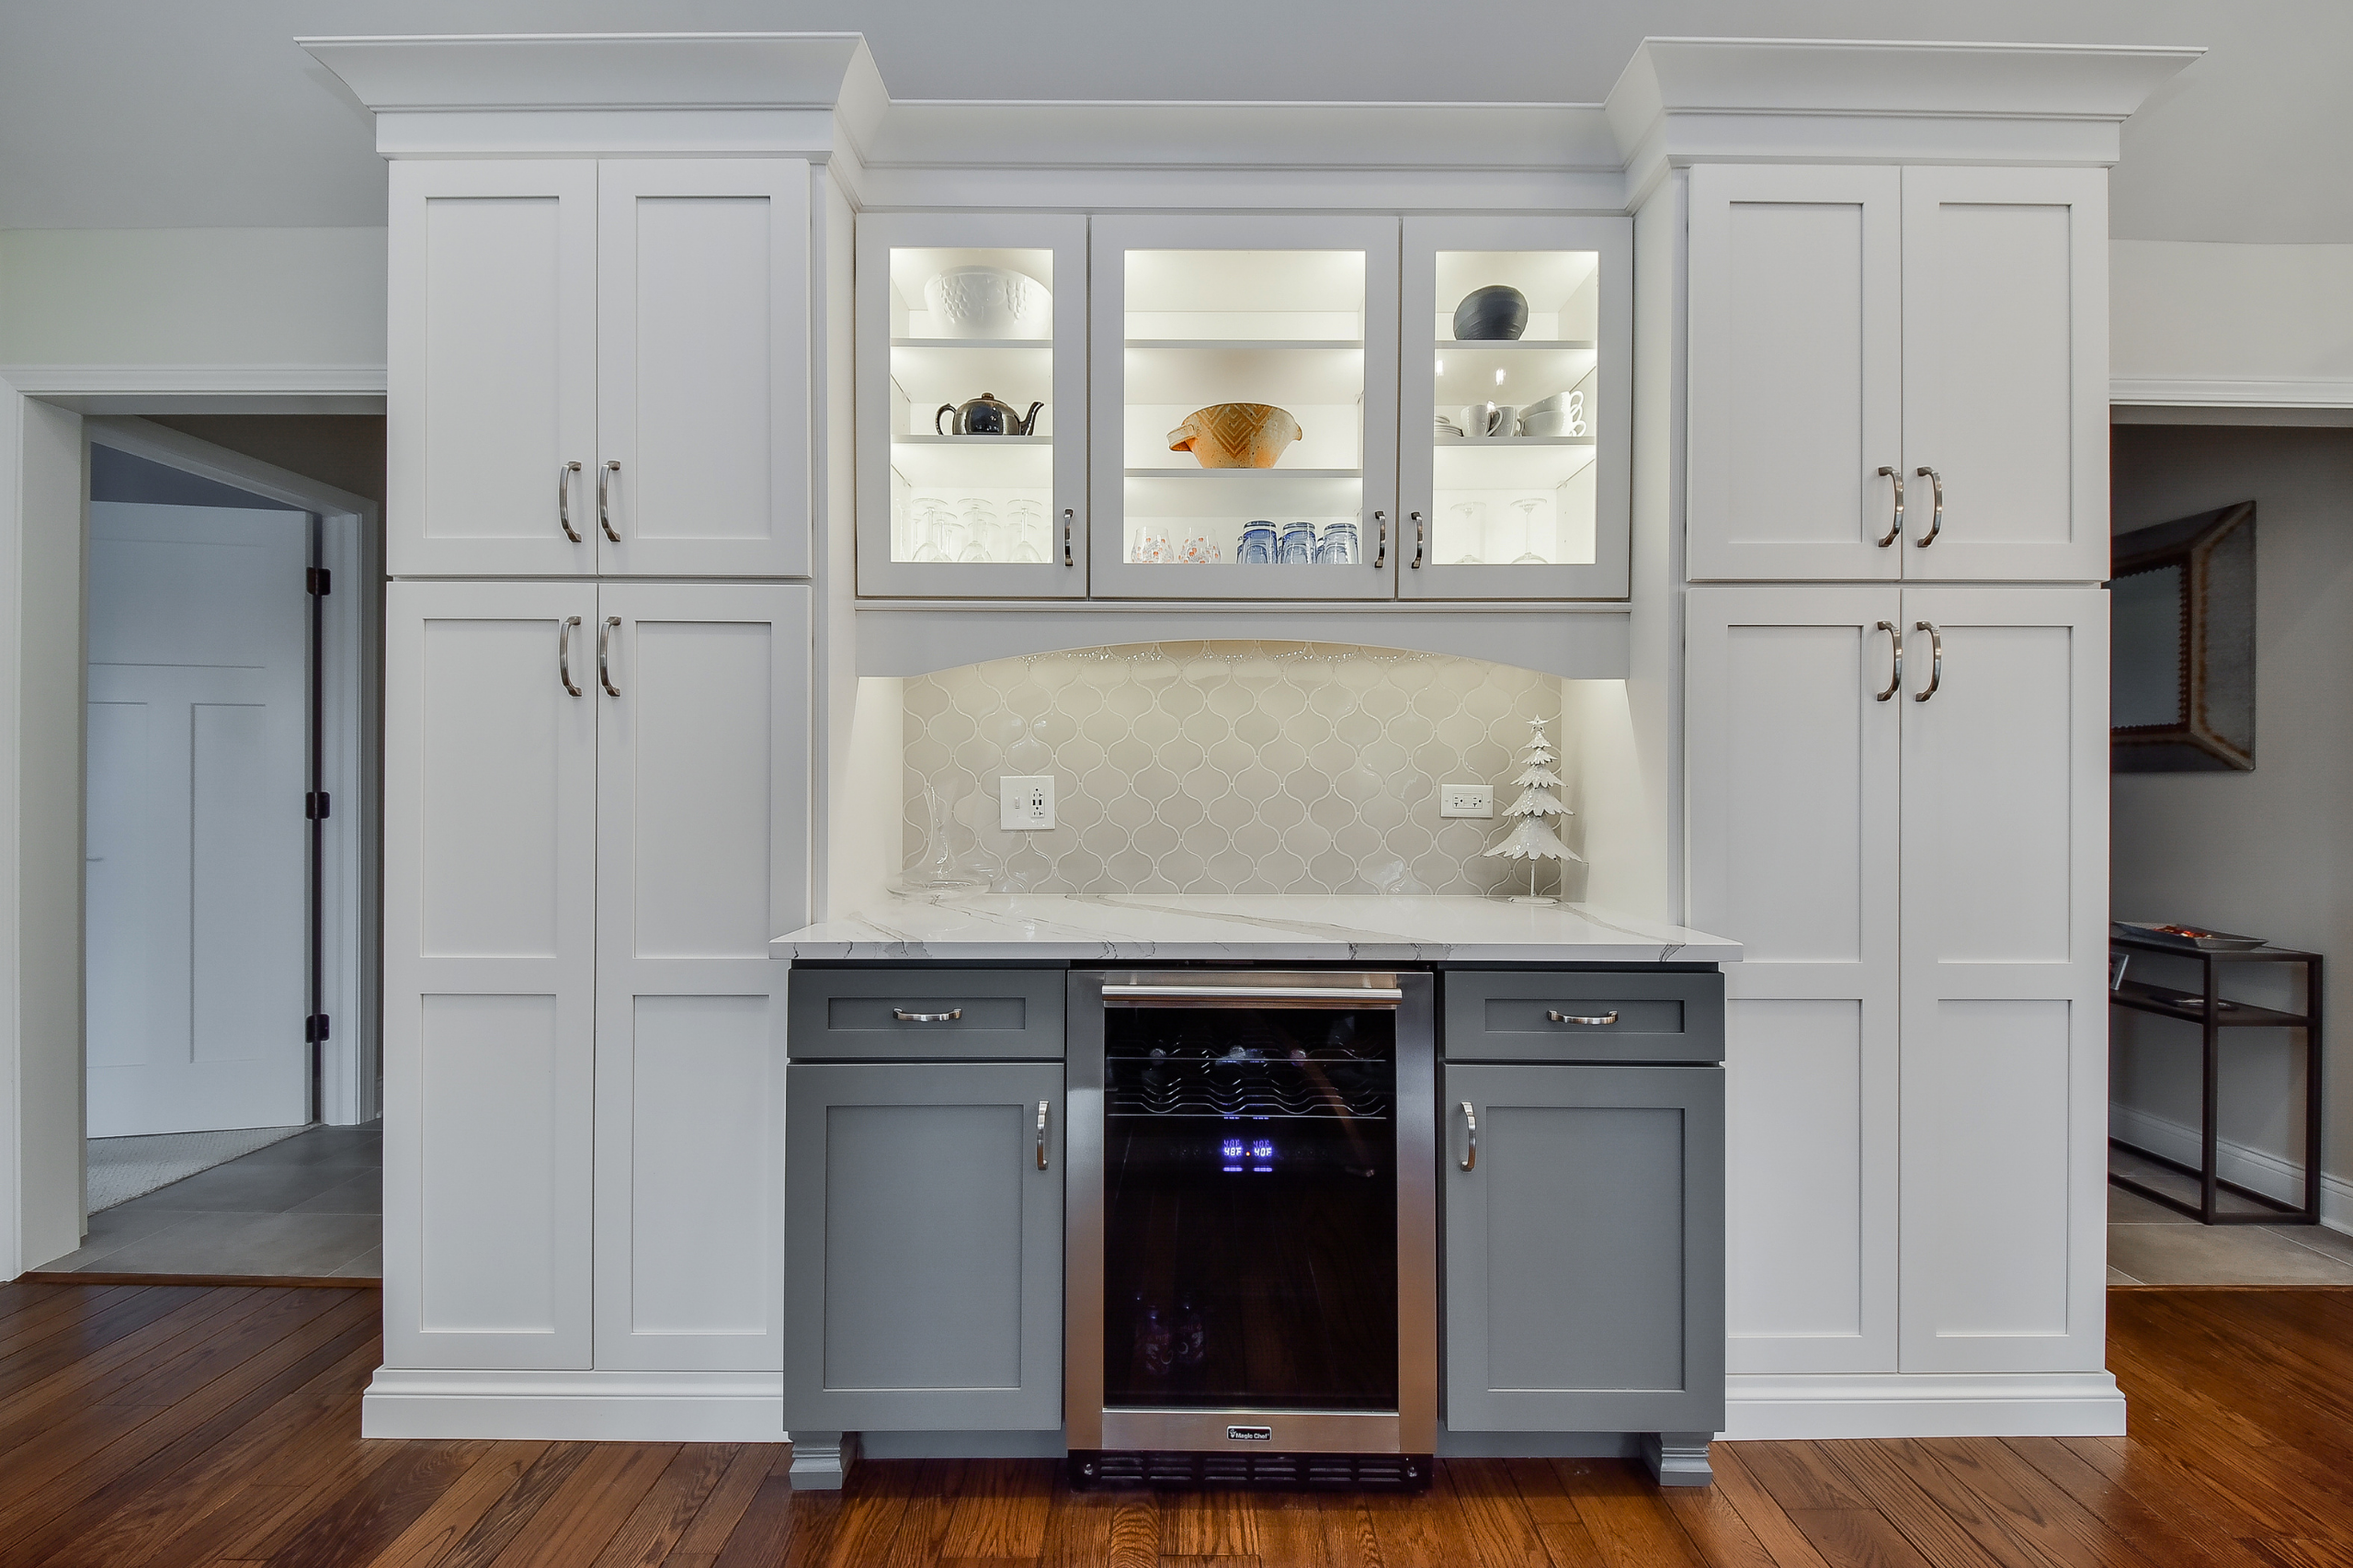 kitchen-cabinet-sizes-and-specifications-guide-sebring-design-build